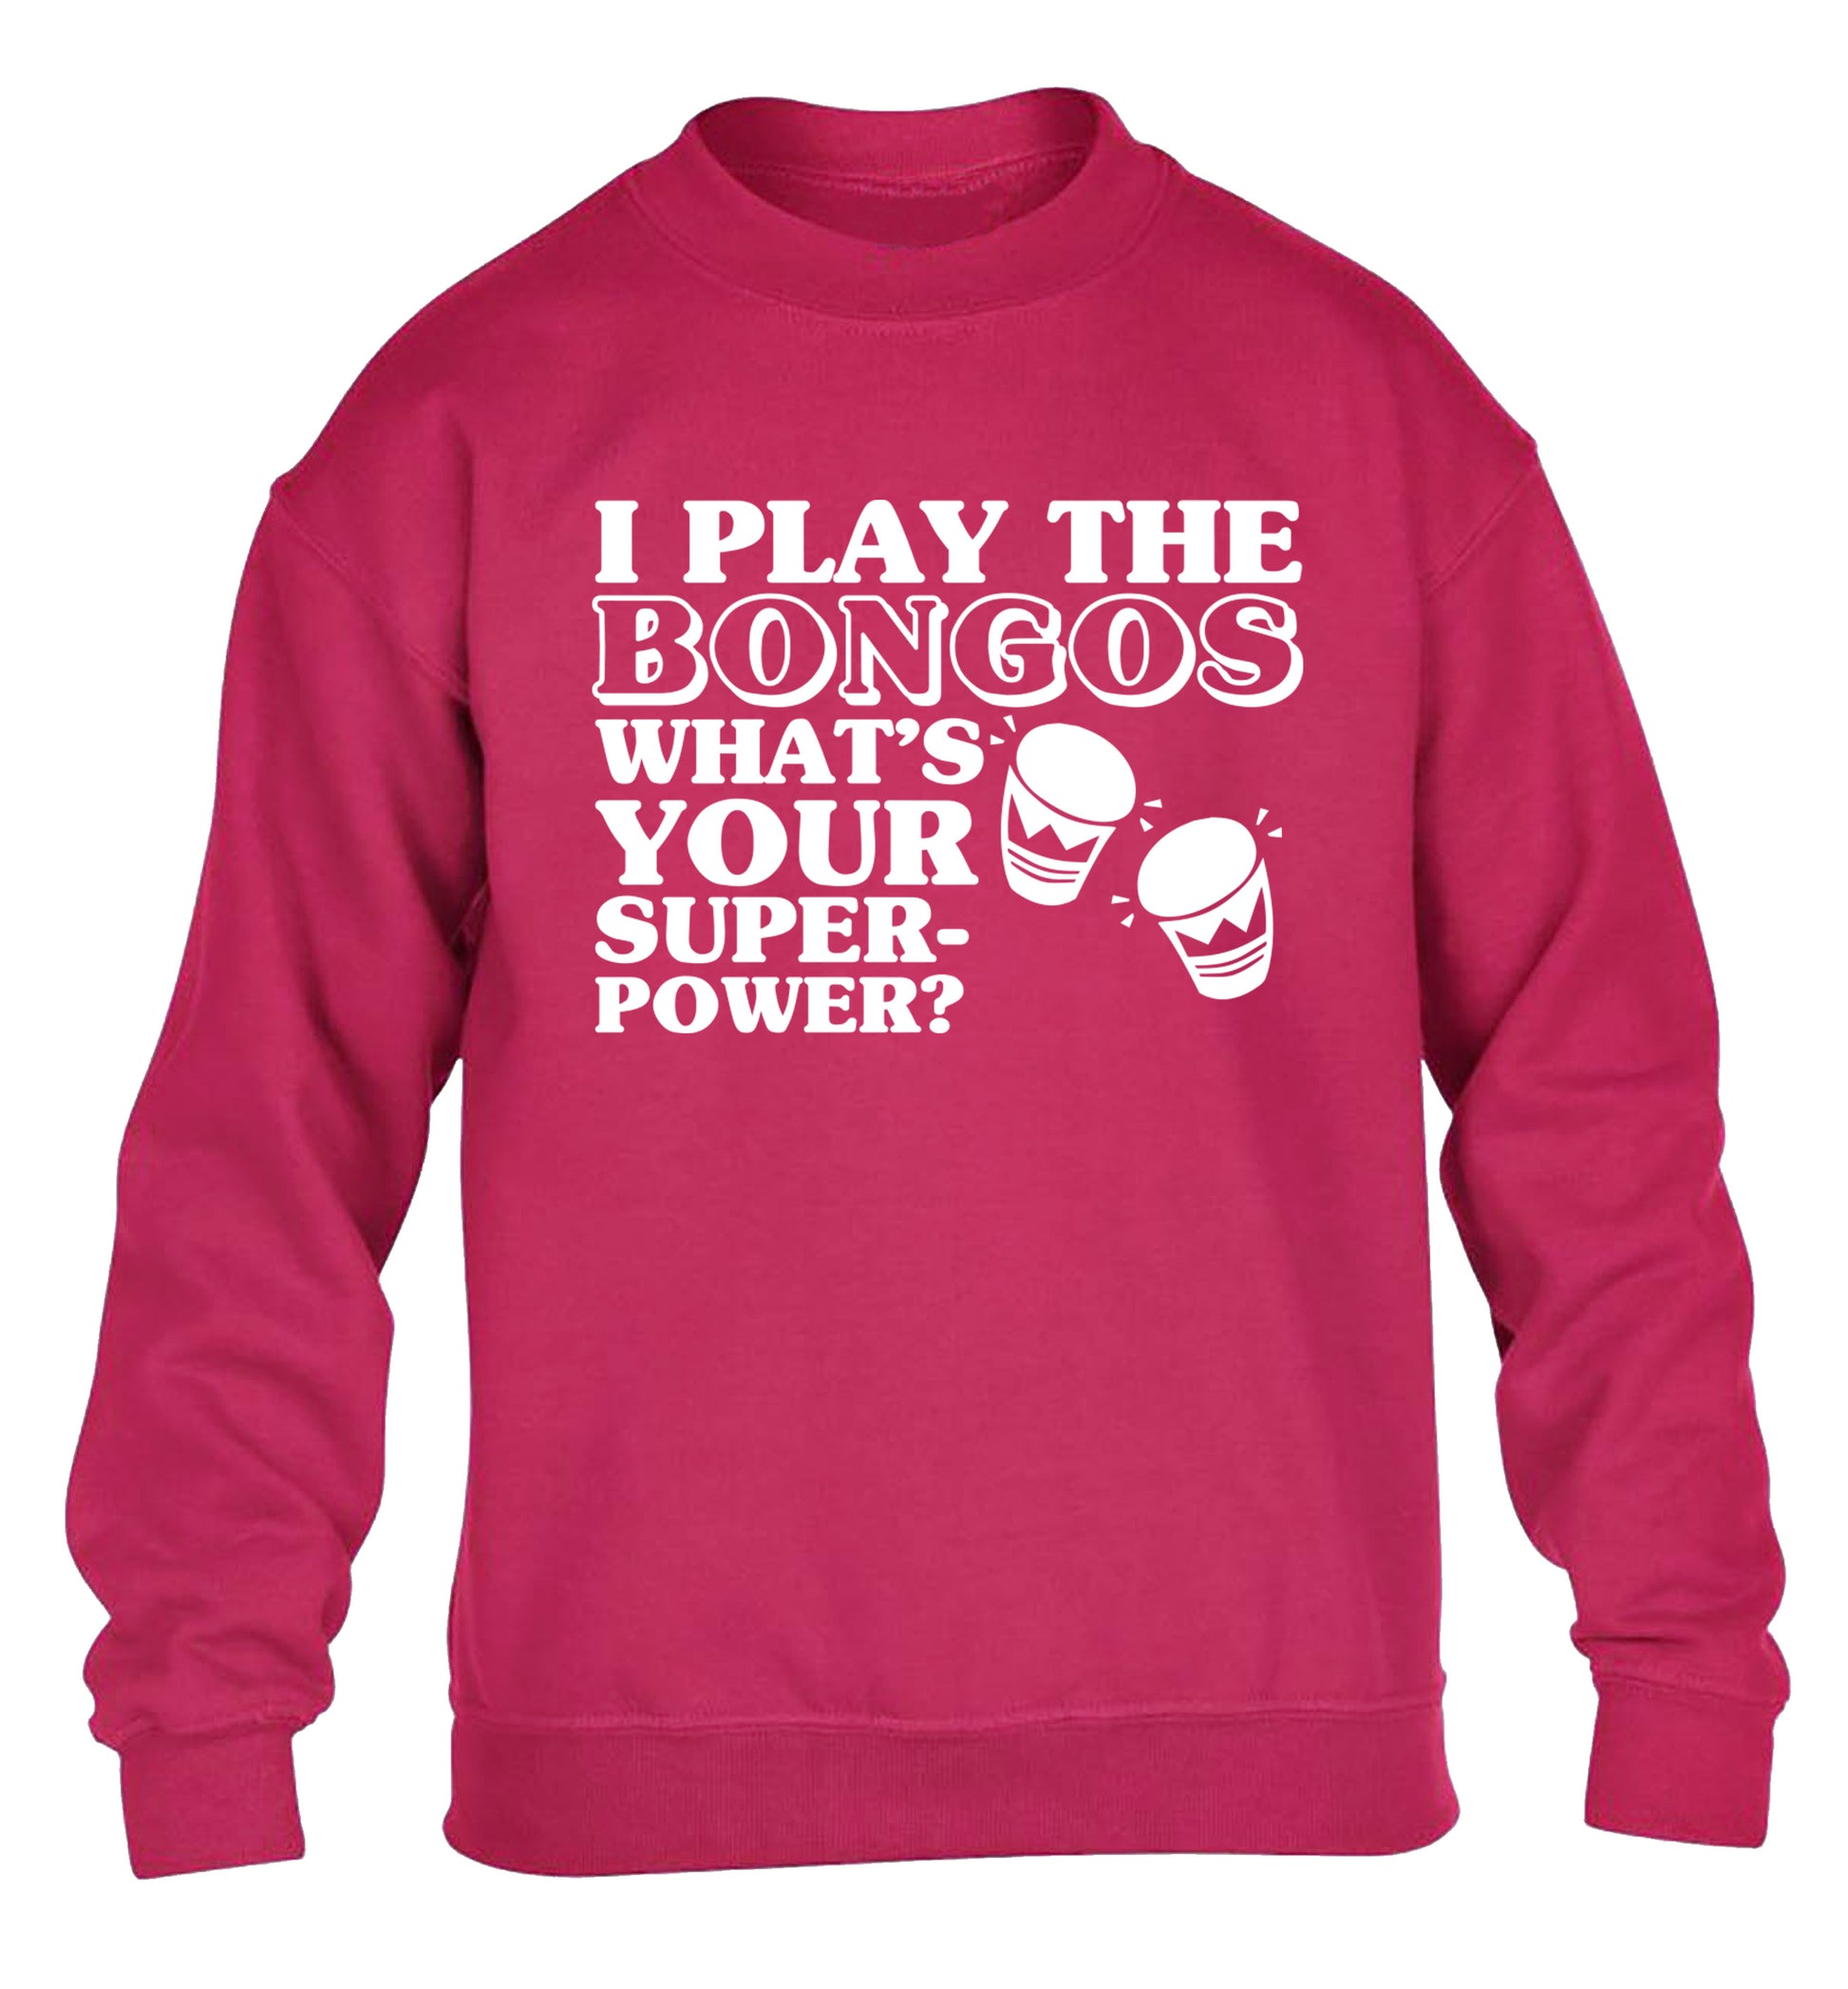 I play the bongos what's your superpower? children's pink sweater 12-14 Years